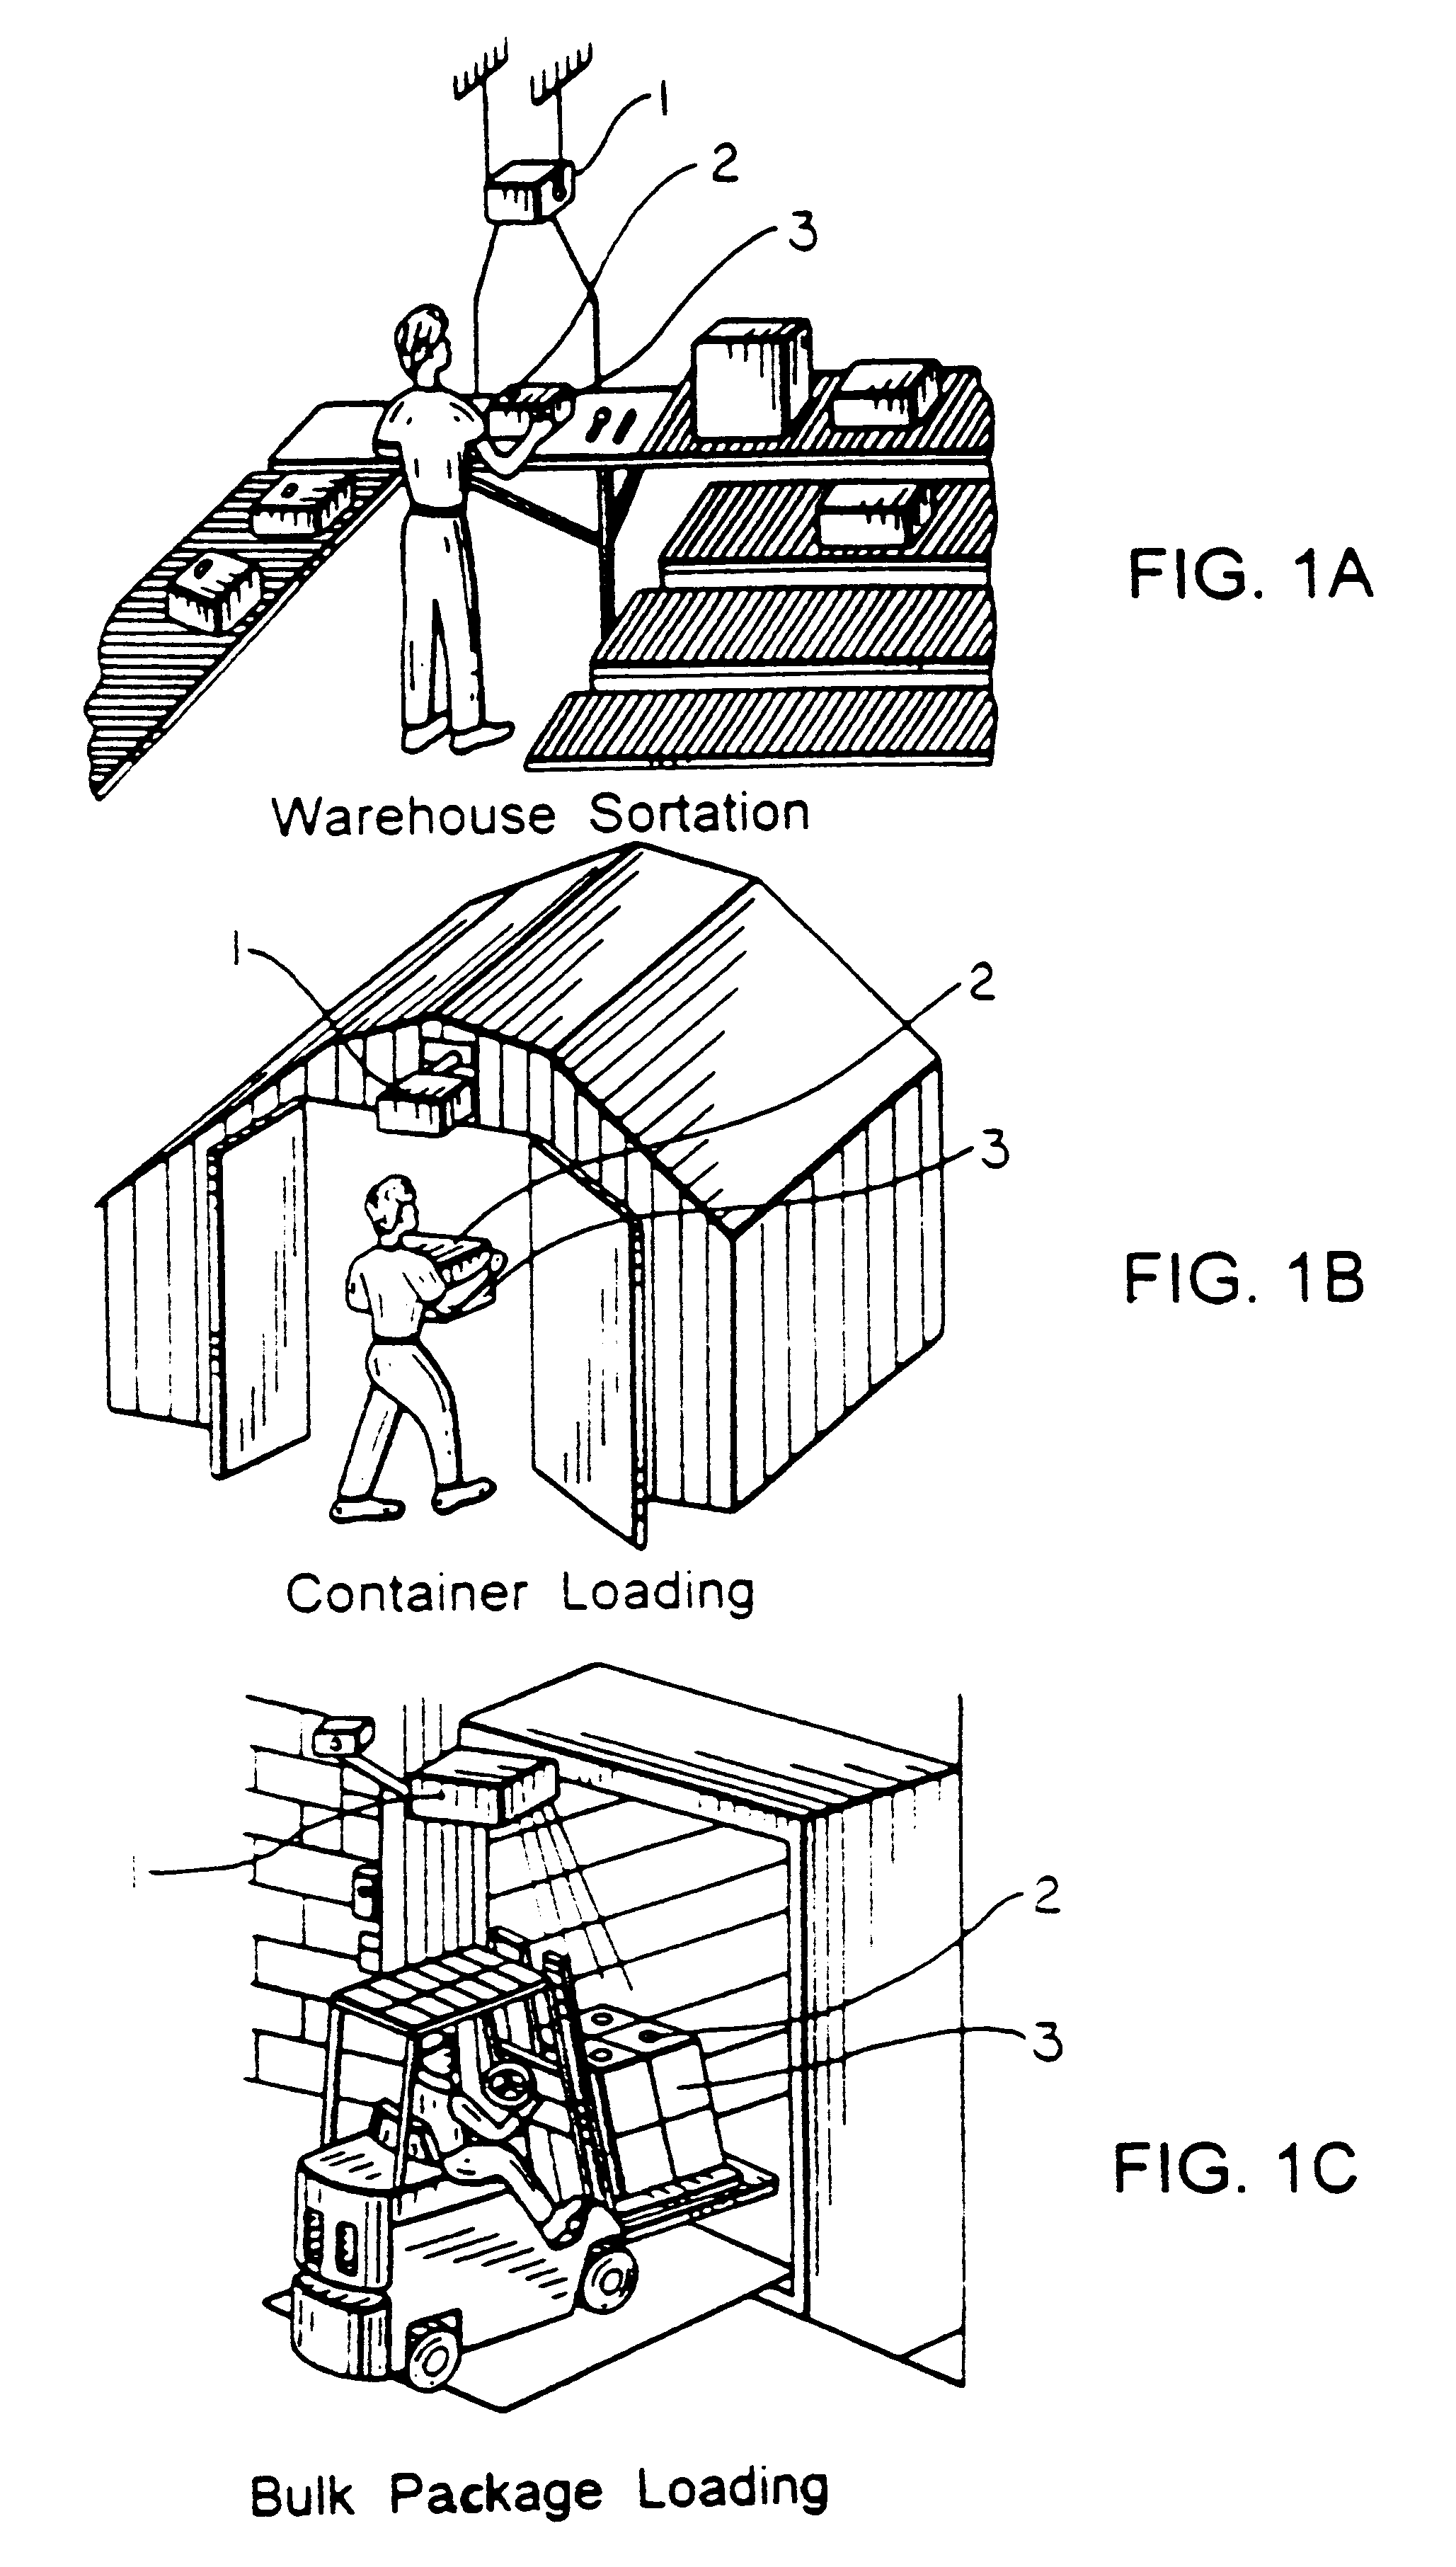 Bar code symbol scanning system having a holographic laser scanning disc utilizing maximum light collection surface area thereof and having scanning facets with optimized light collection efficiency